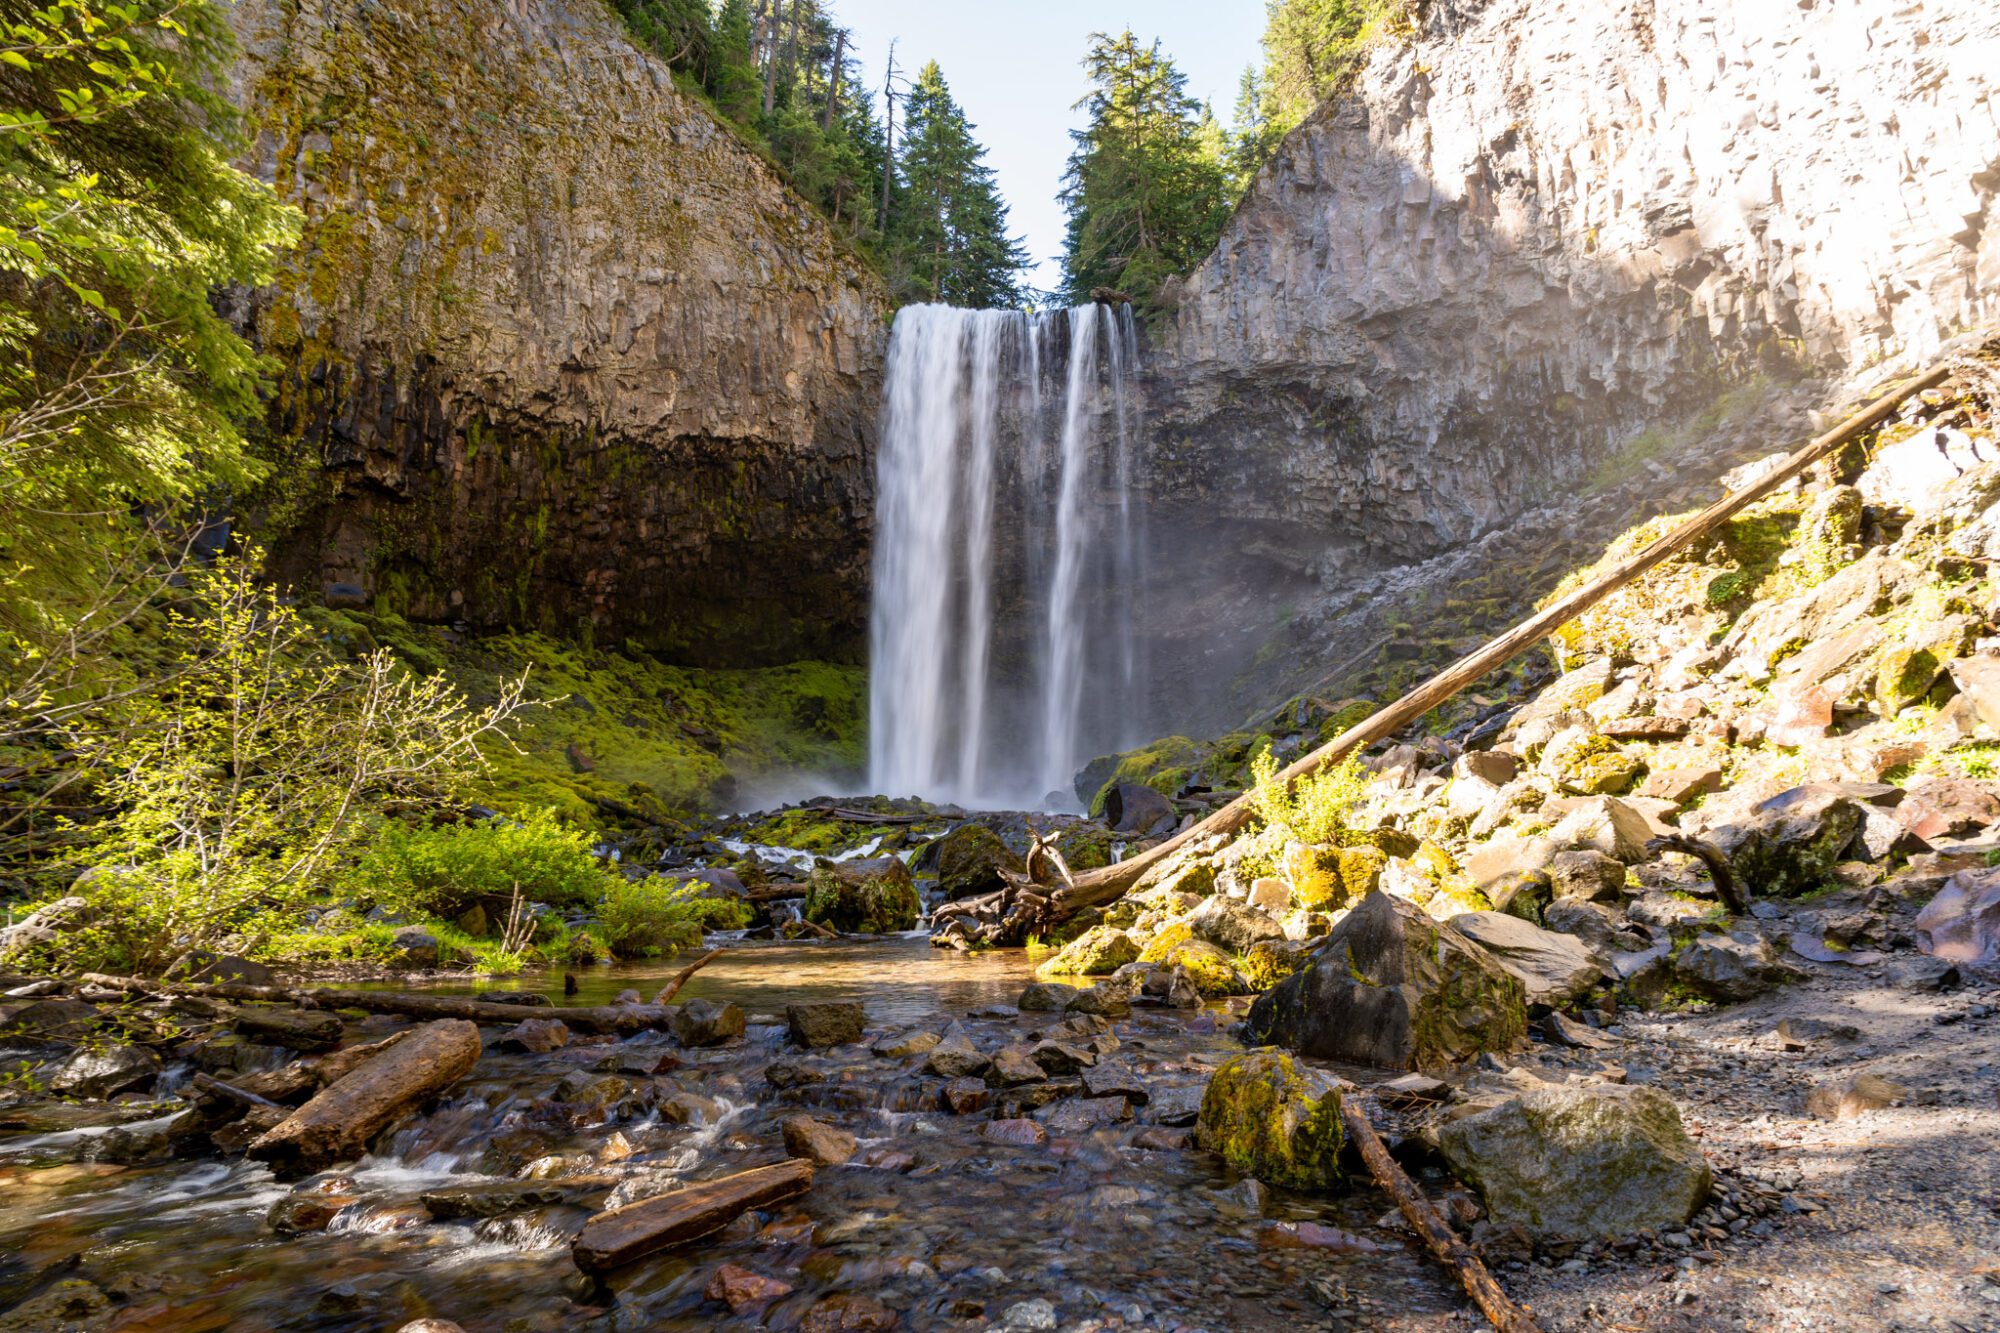 How to Hike the Amazing Tamanawas Falls Trail in Oregon